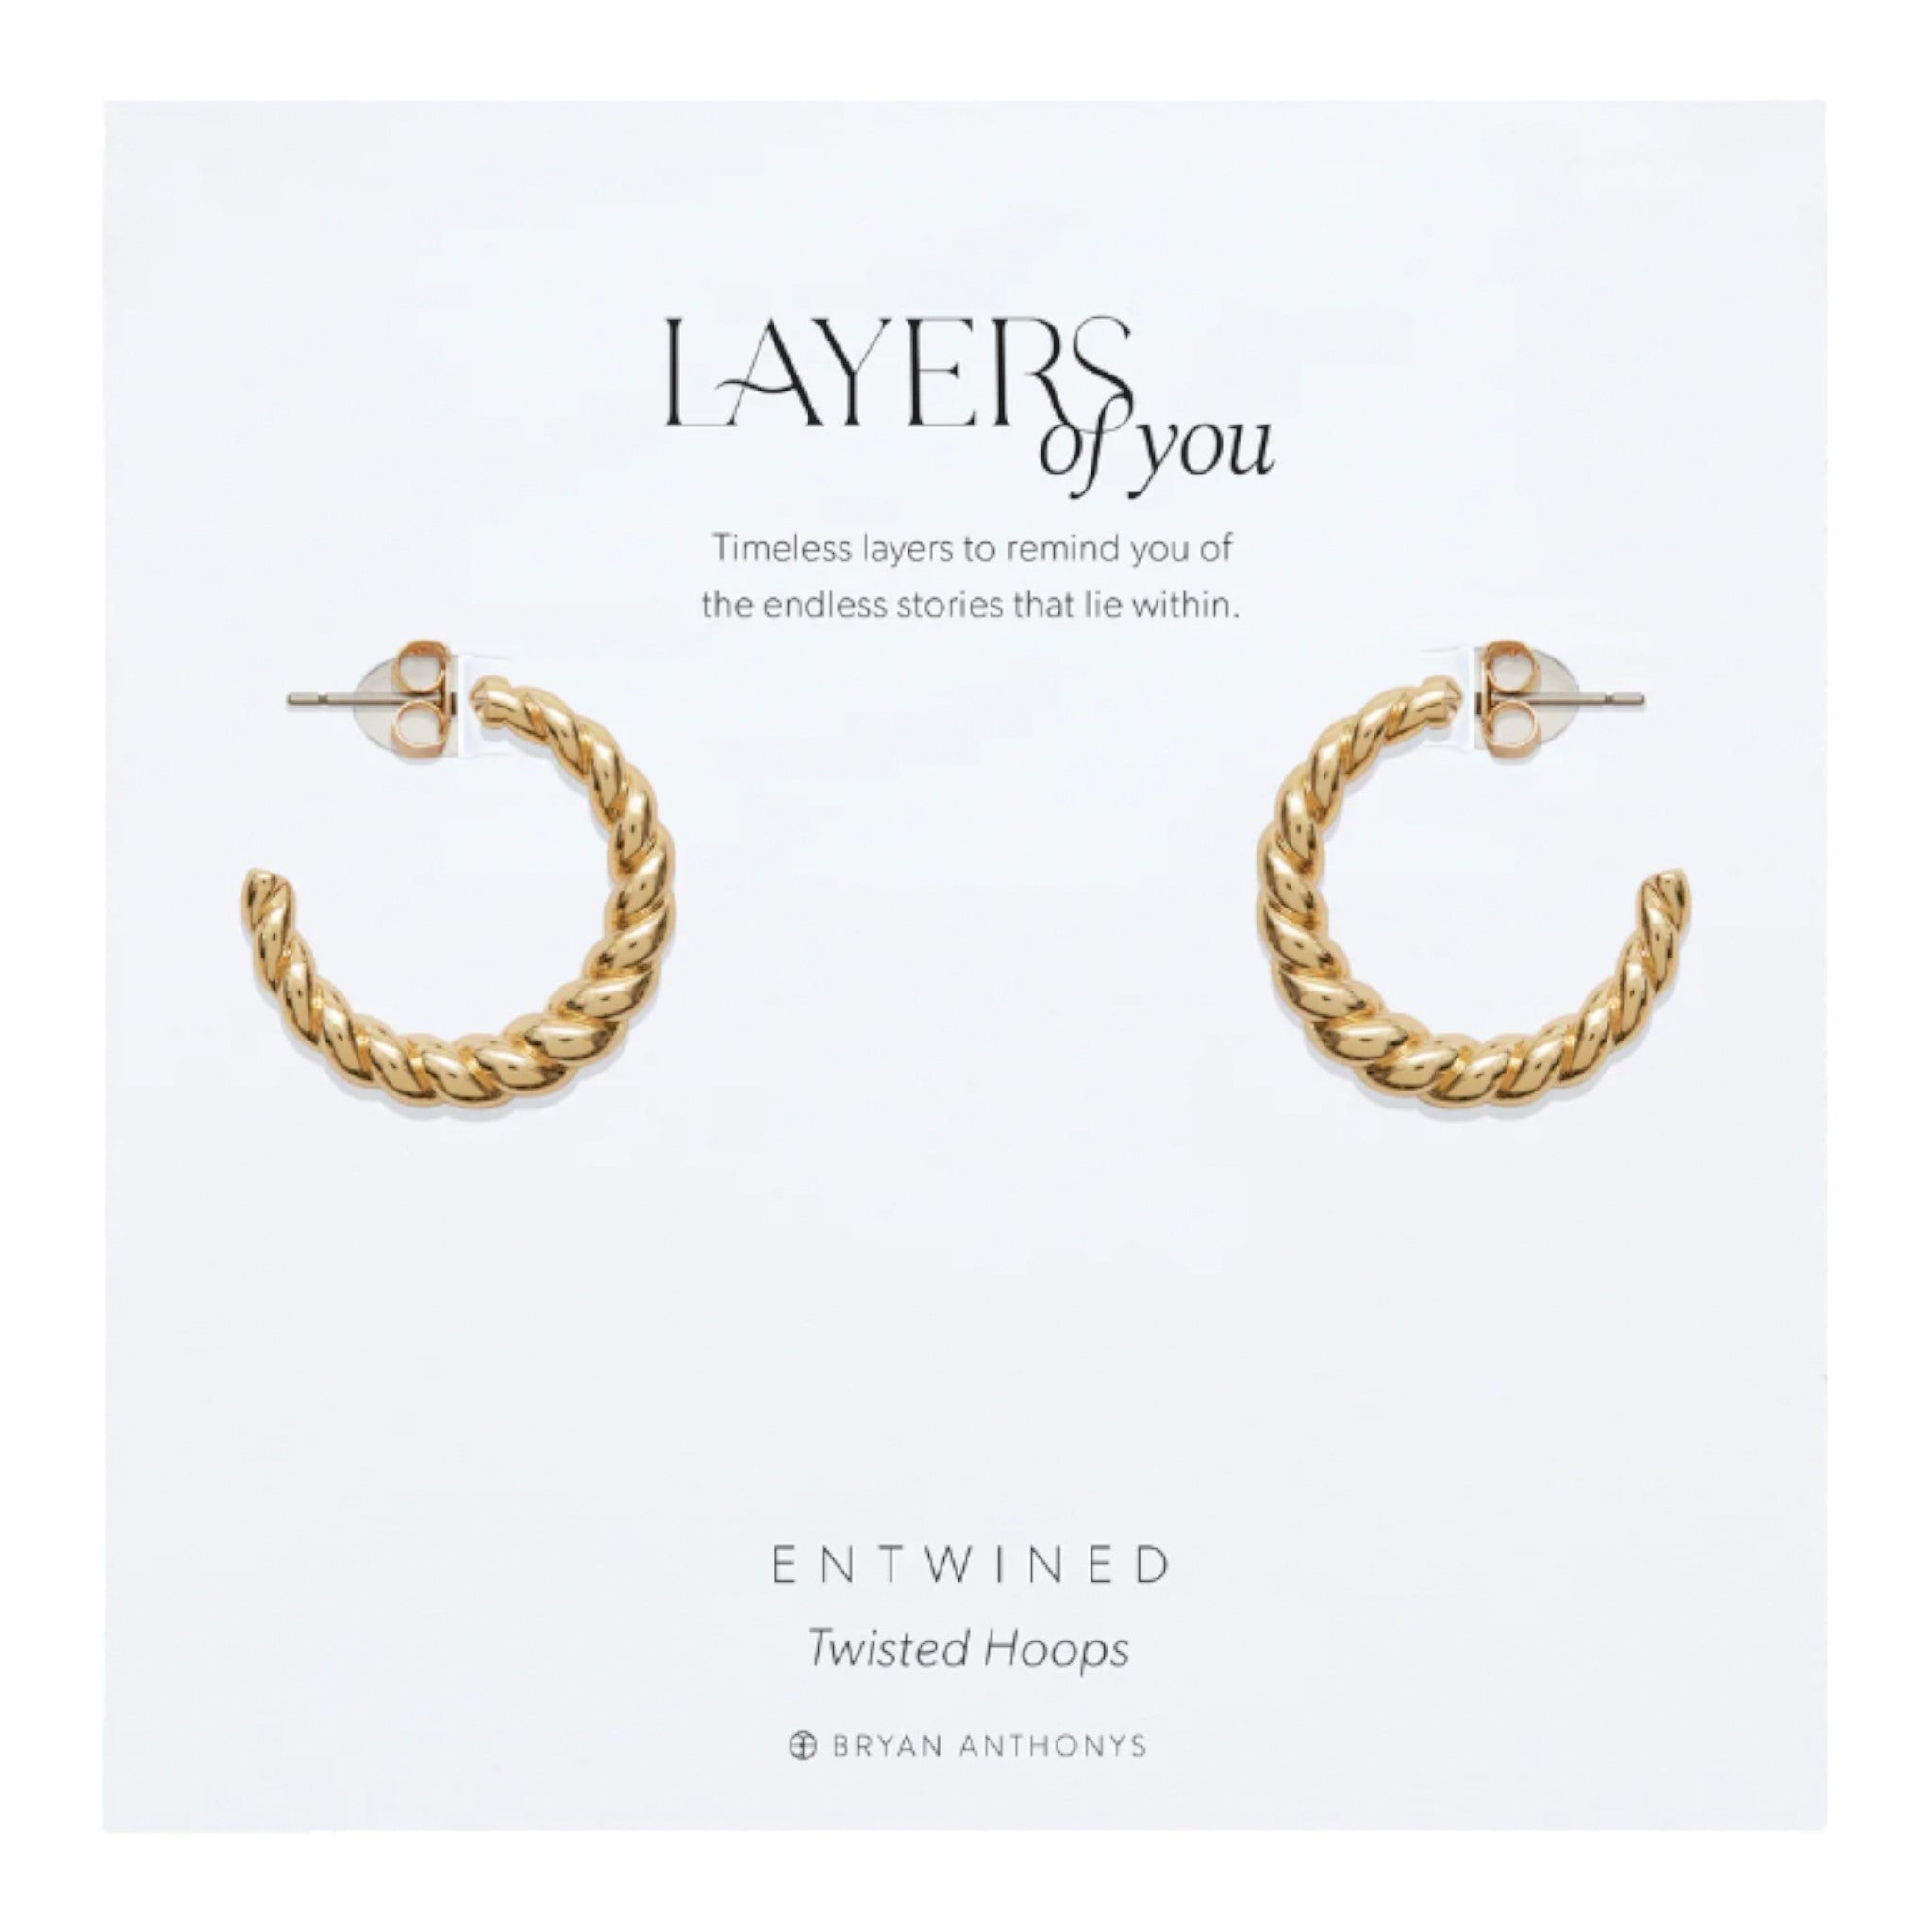 Bryan Anthonys - Entwined Twisted Hoop Earrings - 14K Gold